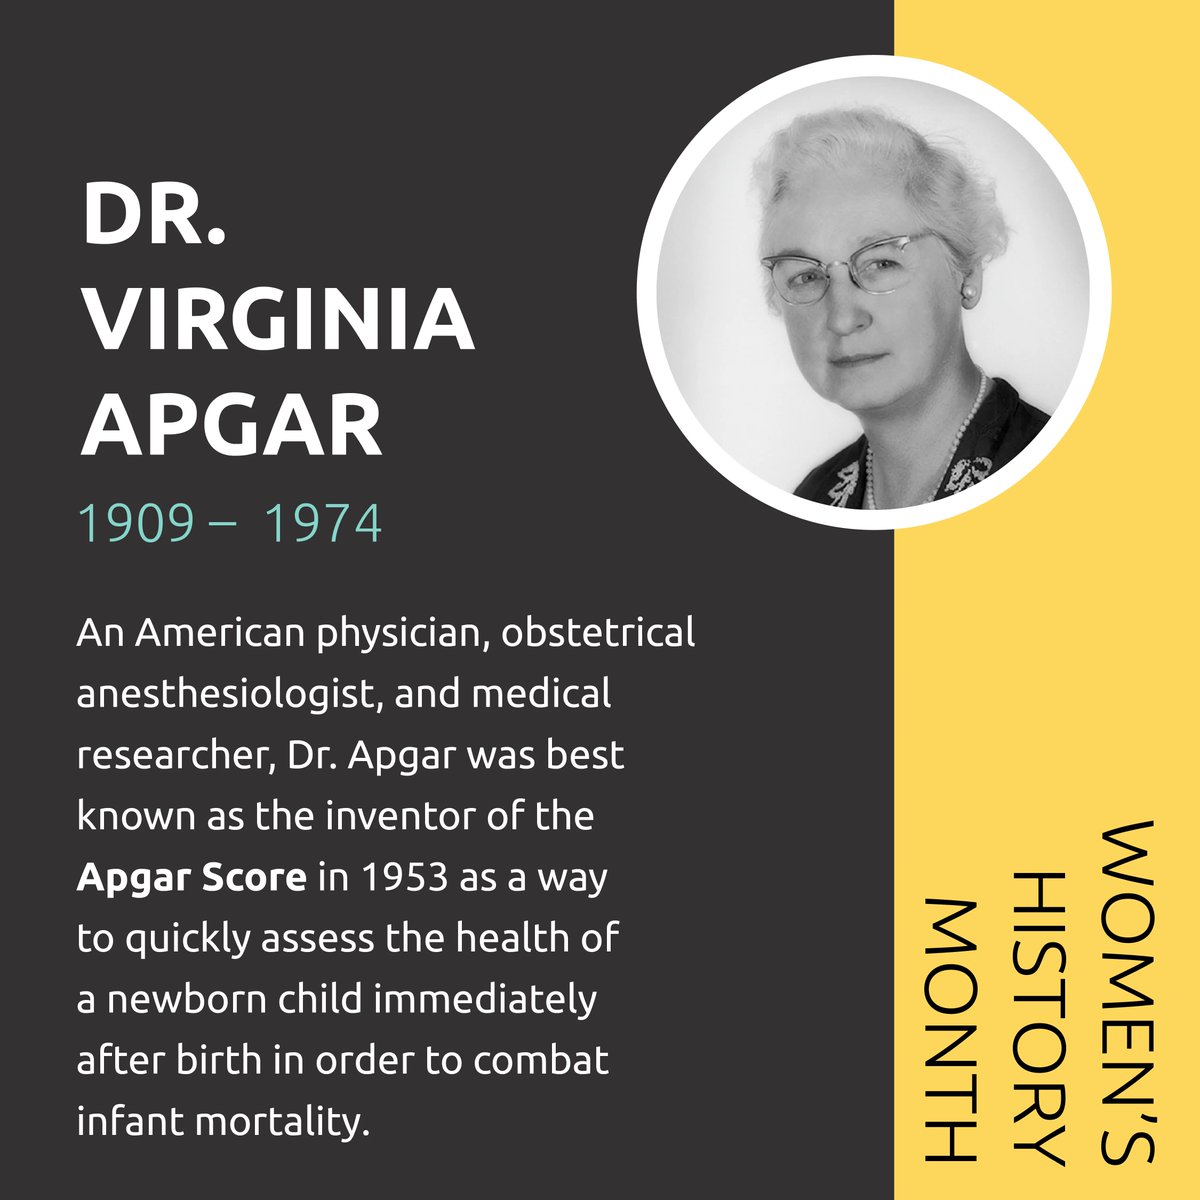 For #WomensHistoryMonth, we're honoring women throughout history that have paved the way for us - like Dr. Virginia Apgar who created the Apgar Score Chart in 1953. #MedEd #pediatrics #neonatology #neonatal #nicunurse #MedTwitter #neonatal #nicu #healthybabies #WomenInMedicine